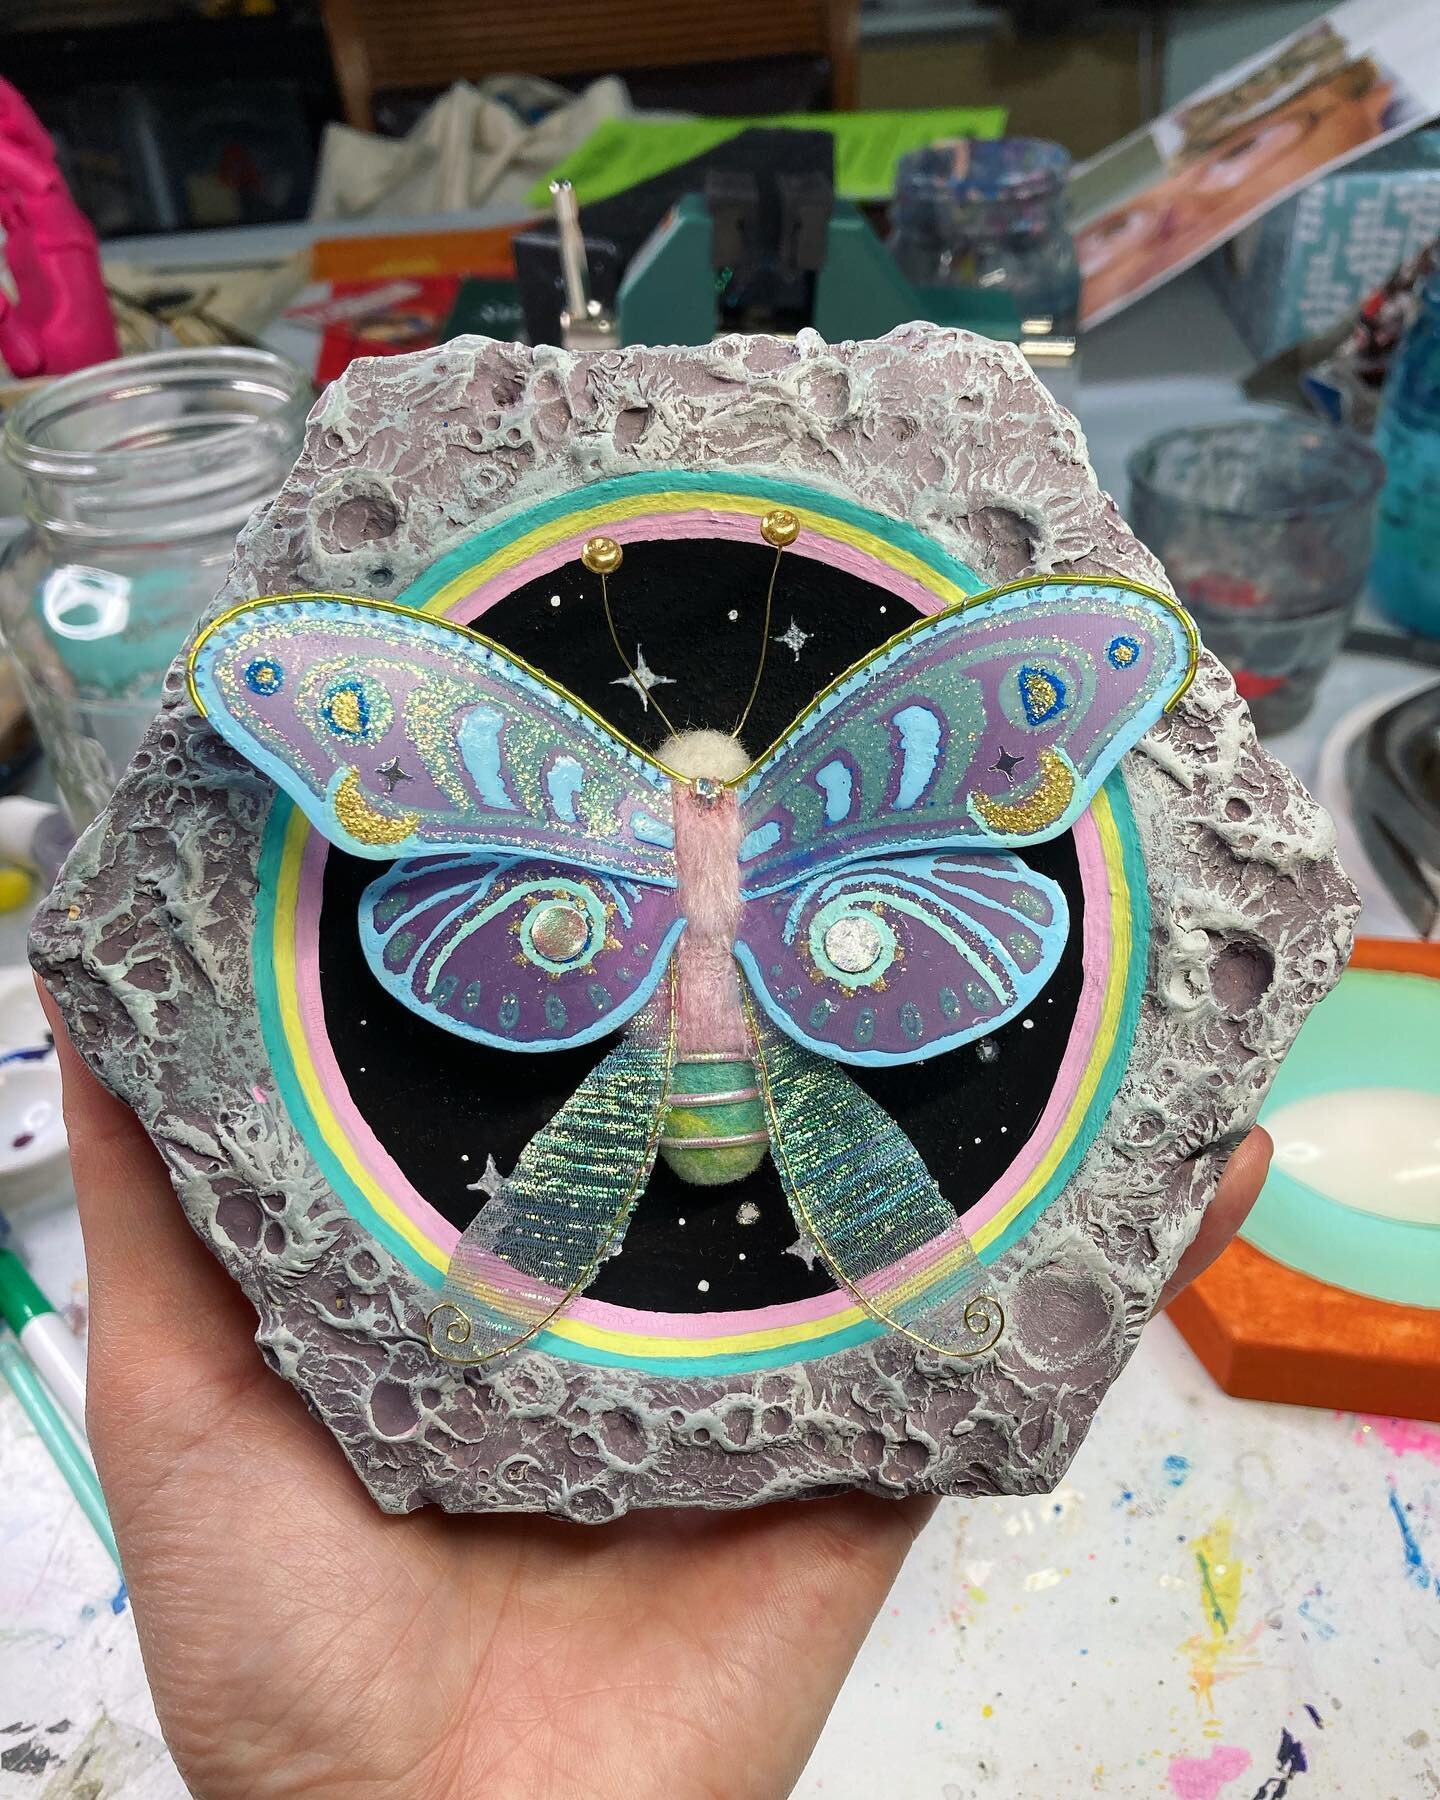 &ldquo;Motherfly&rdquo; mixed media on custom cut hexagon wood panel. I needle felted the body, used duralar and fabric for the wings along with wire and thread.  For the moon texture I used paper clay. I have a bunch of different ideas that will go 